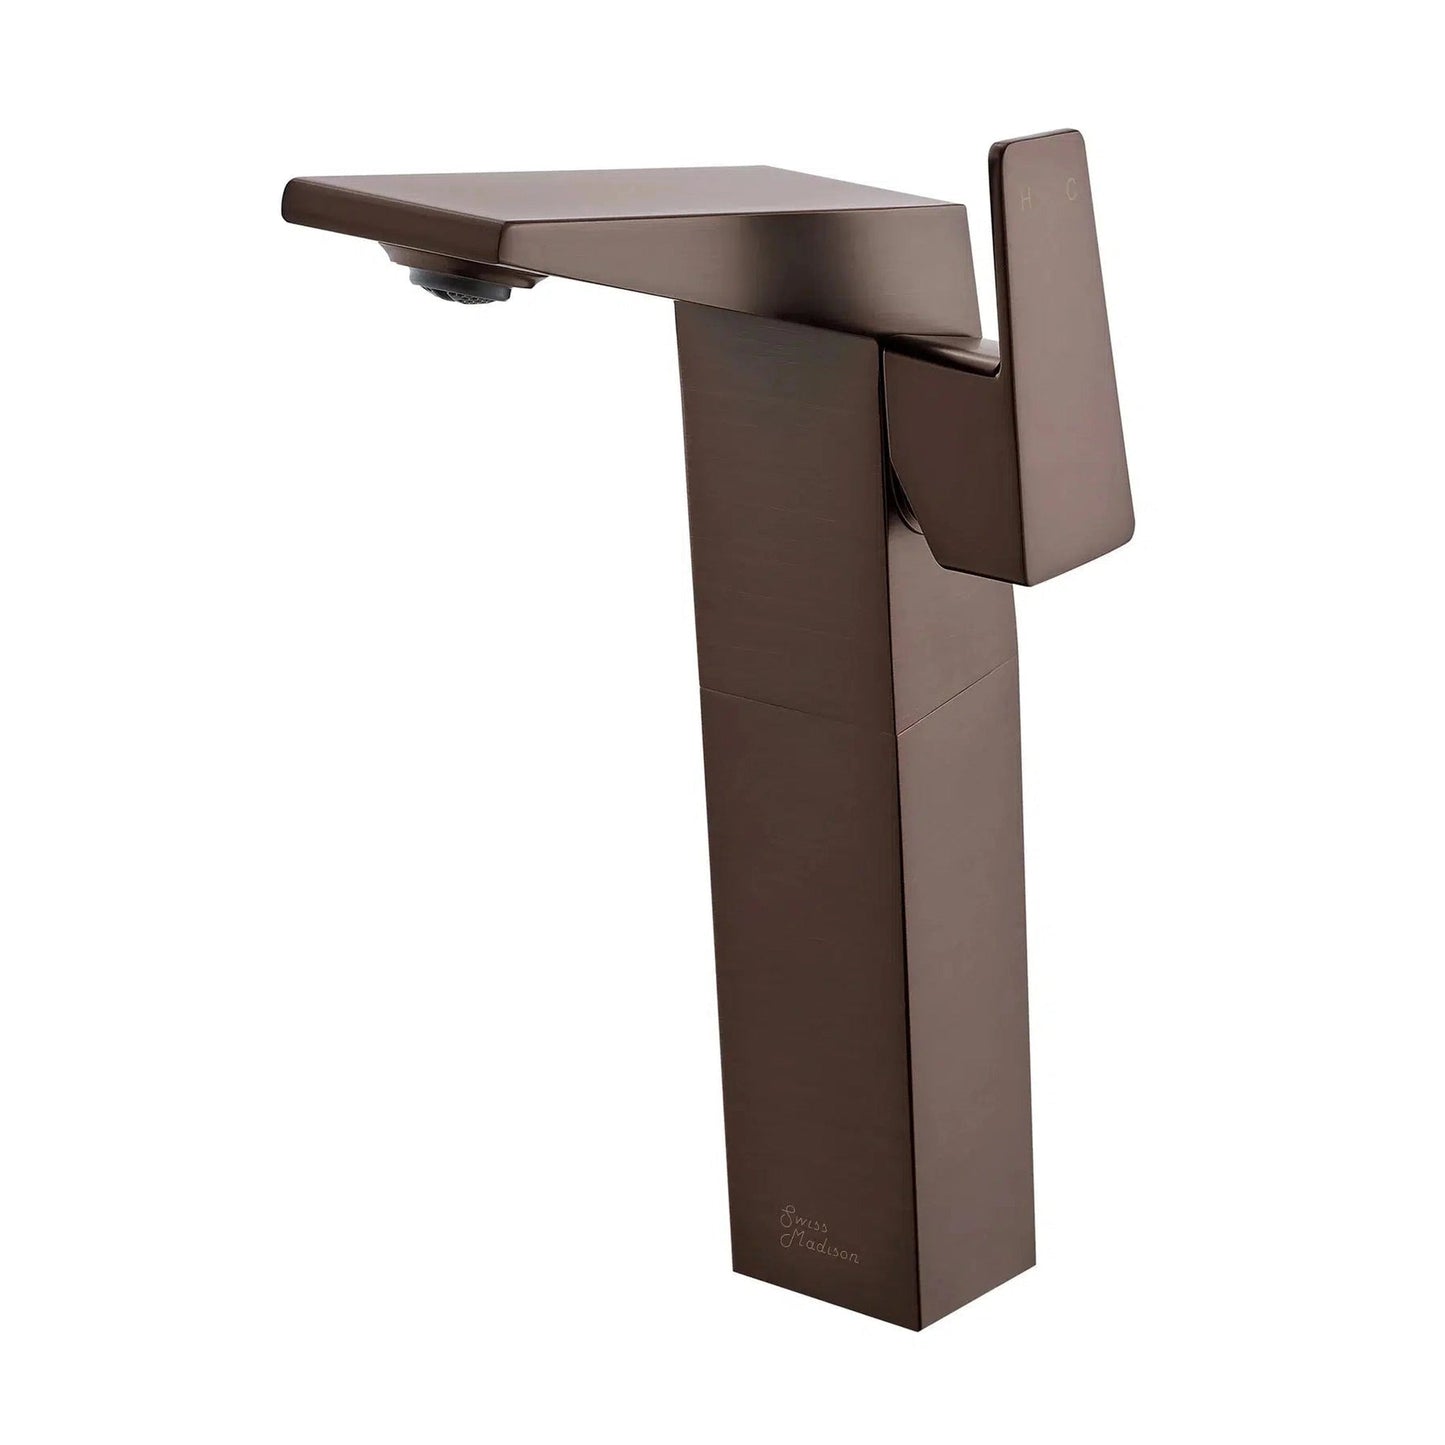 Swiss Madison Carré 9" Oil Rubbed Bronze Single Hole Bathroom Faucet With Flow Rate of 1.2 GPM